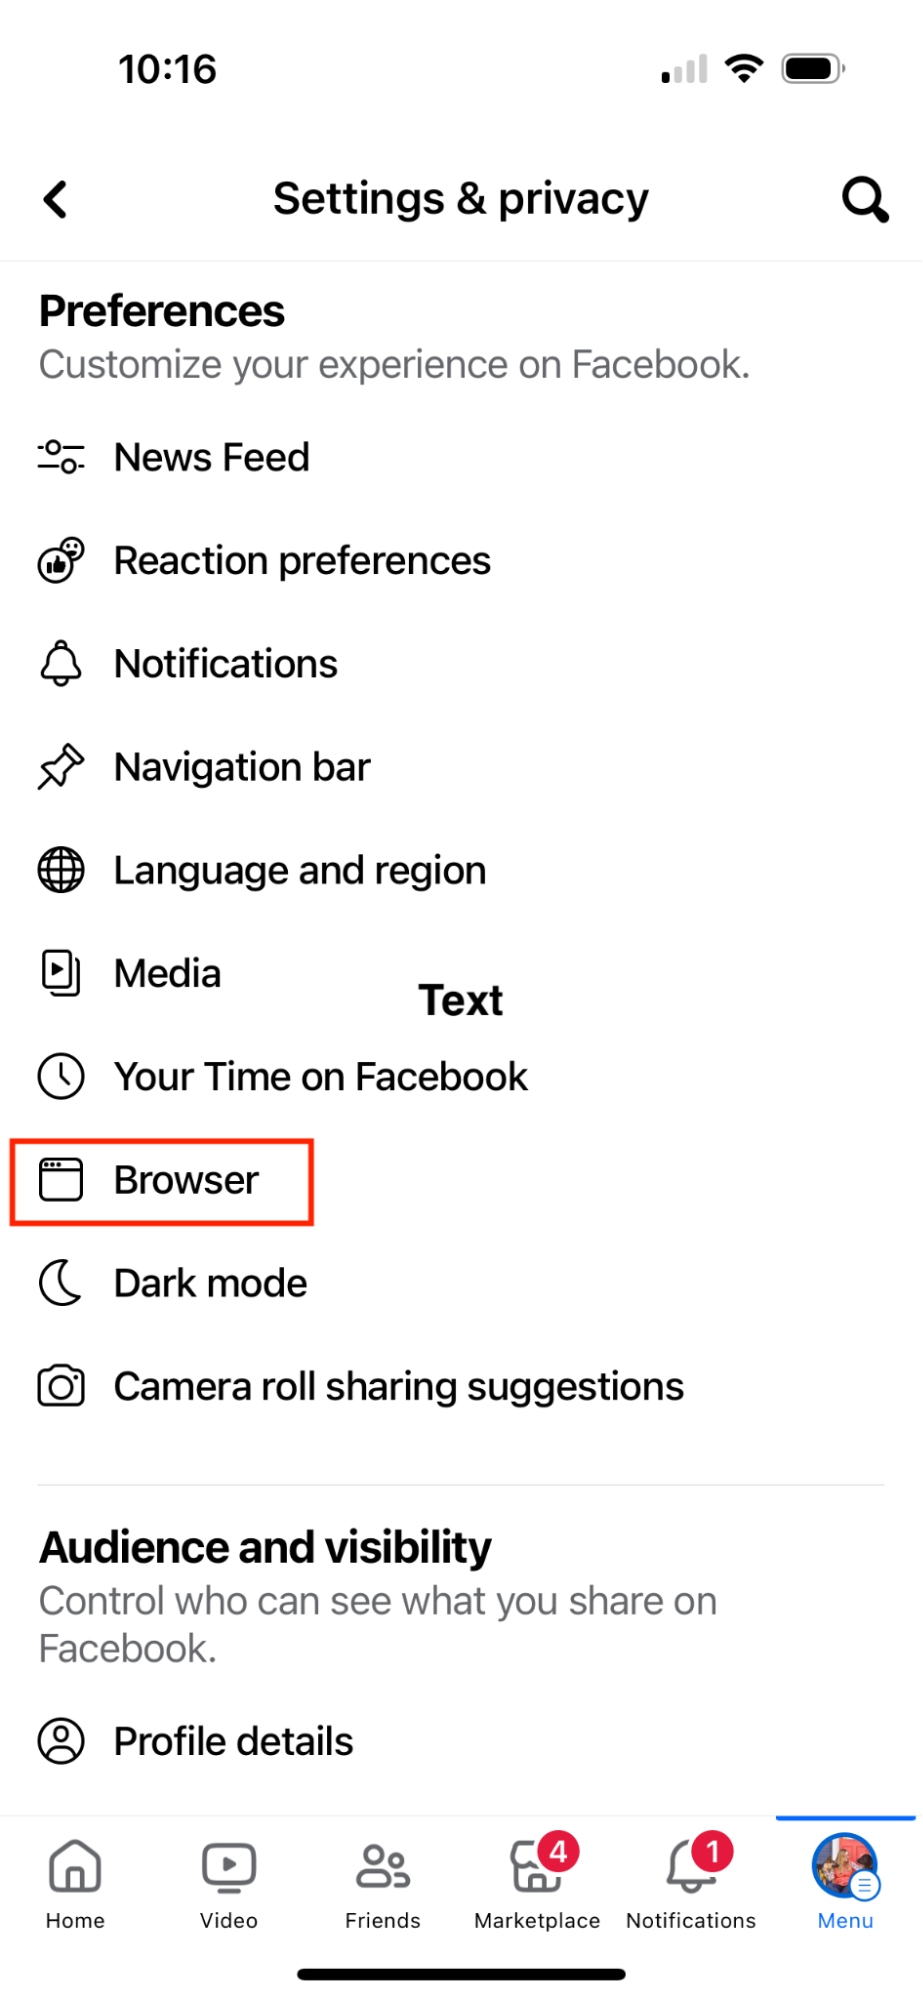 clear your browsing data within the Facebook app